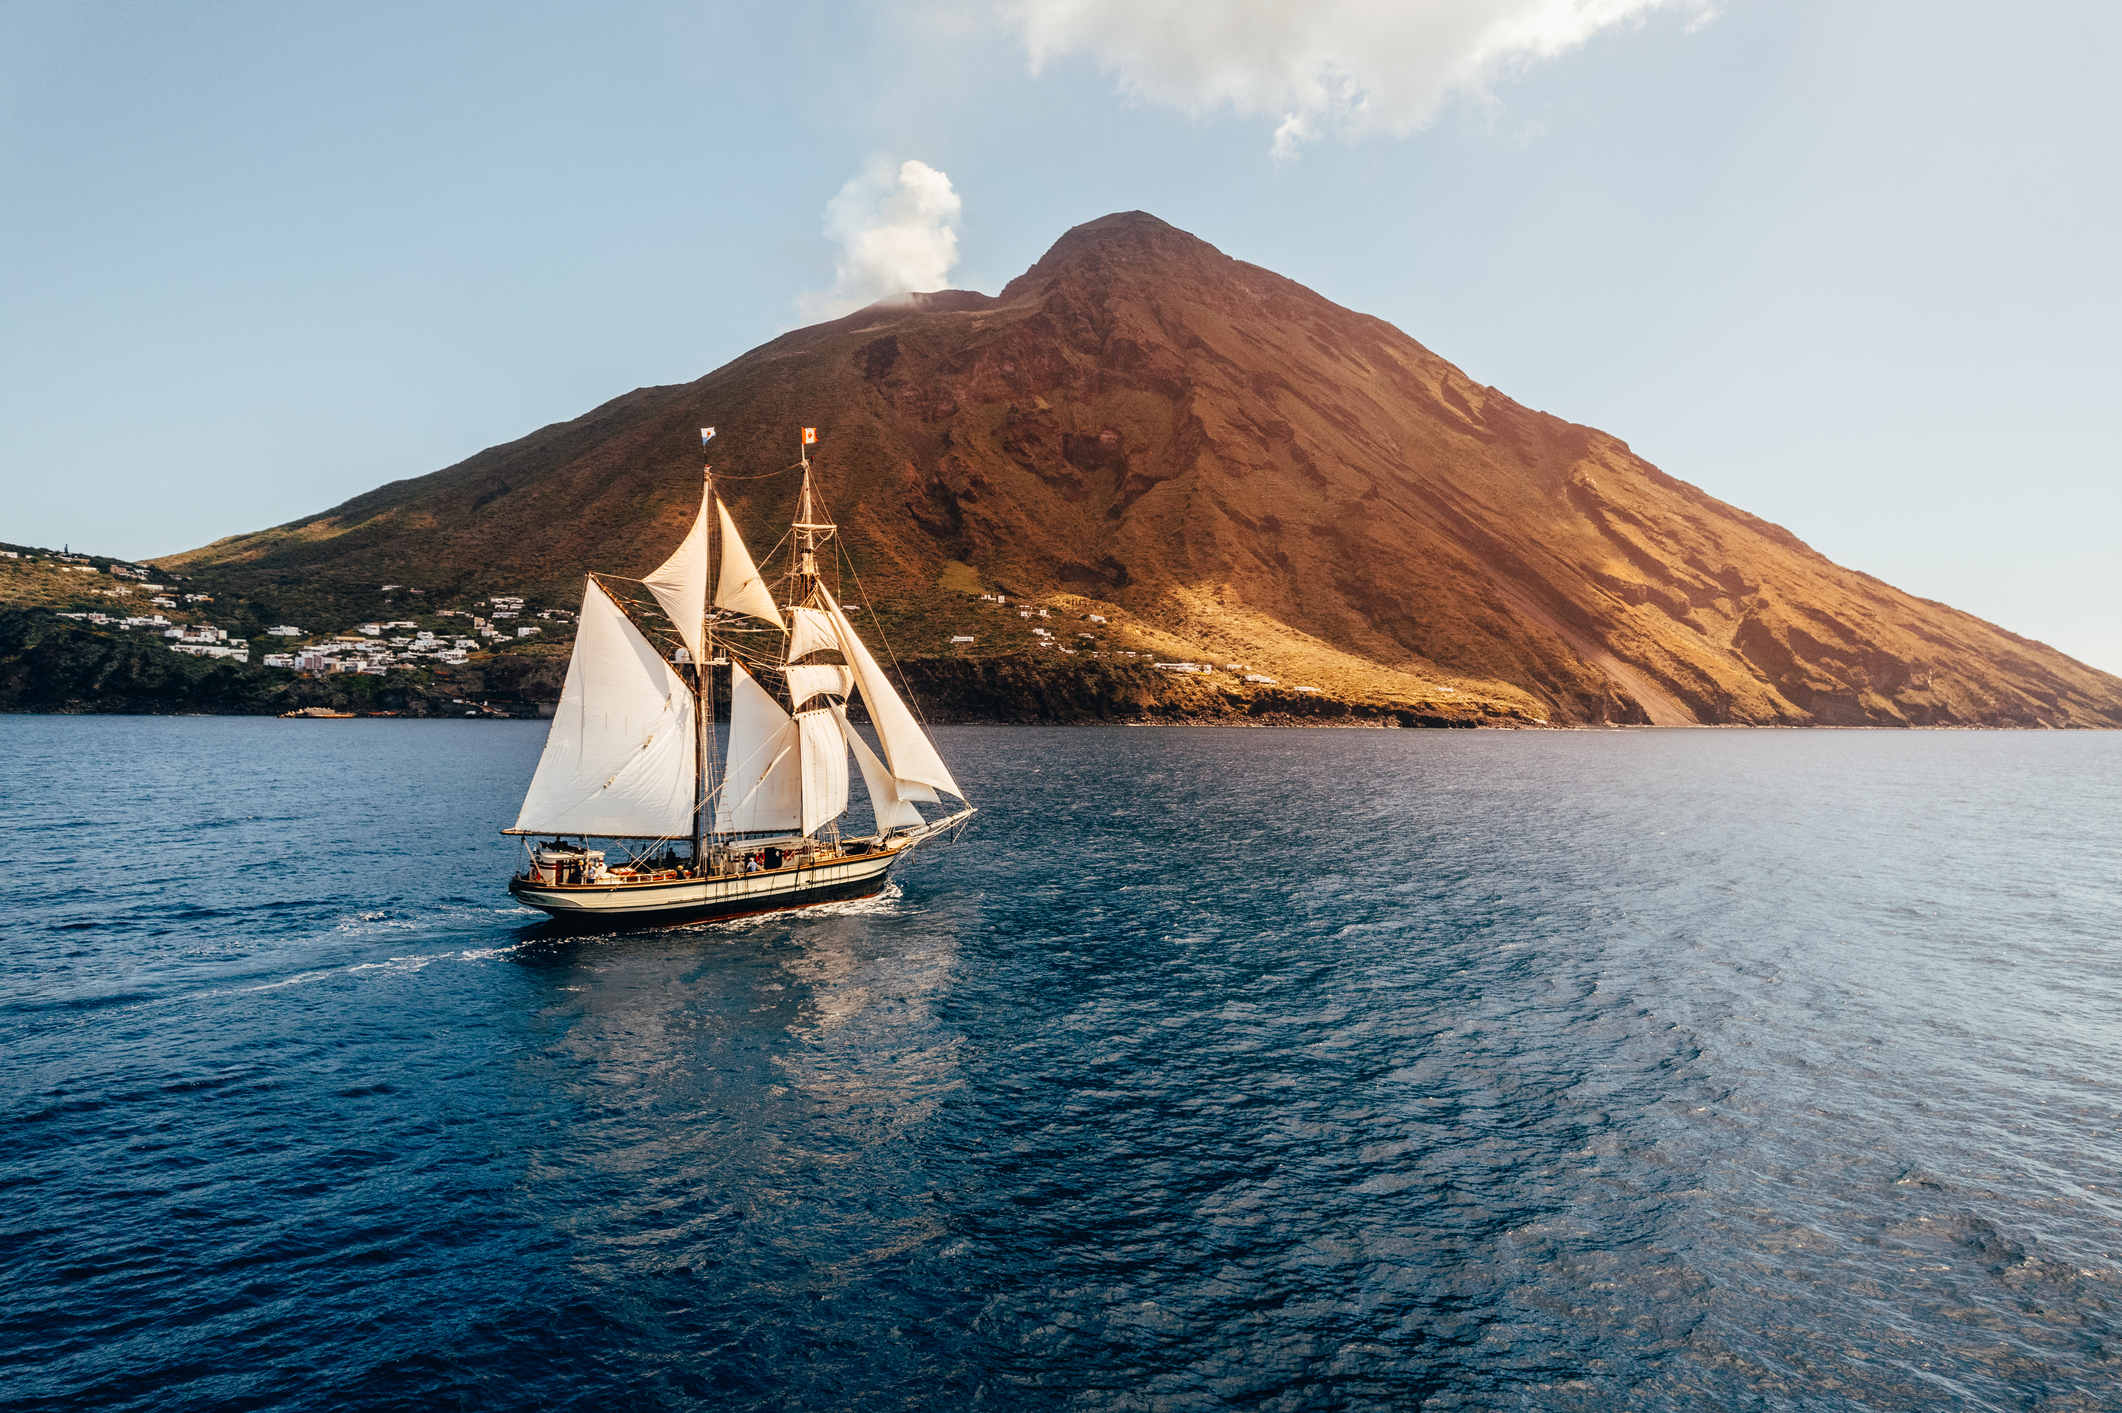 Tall ship sailing past a volcano in Italy during sunset